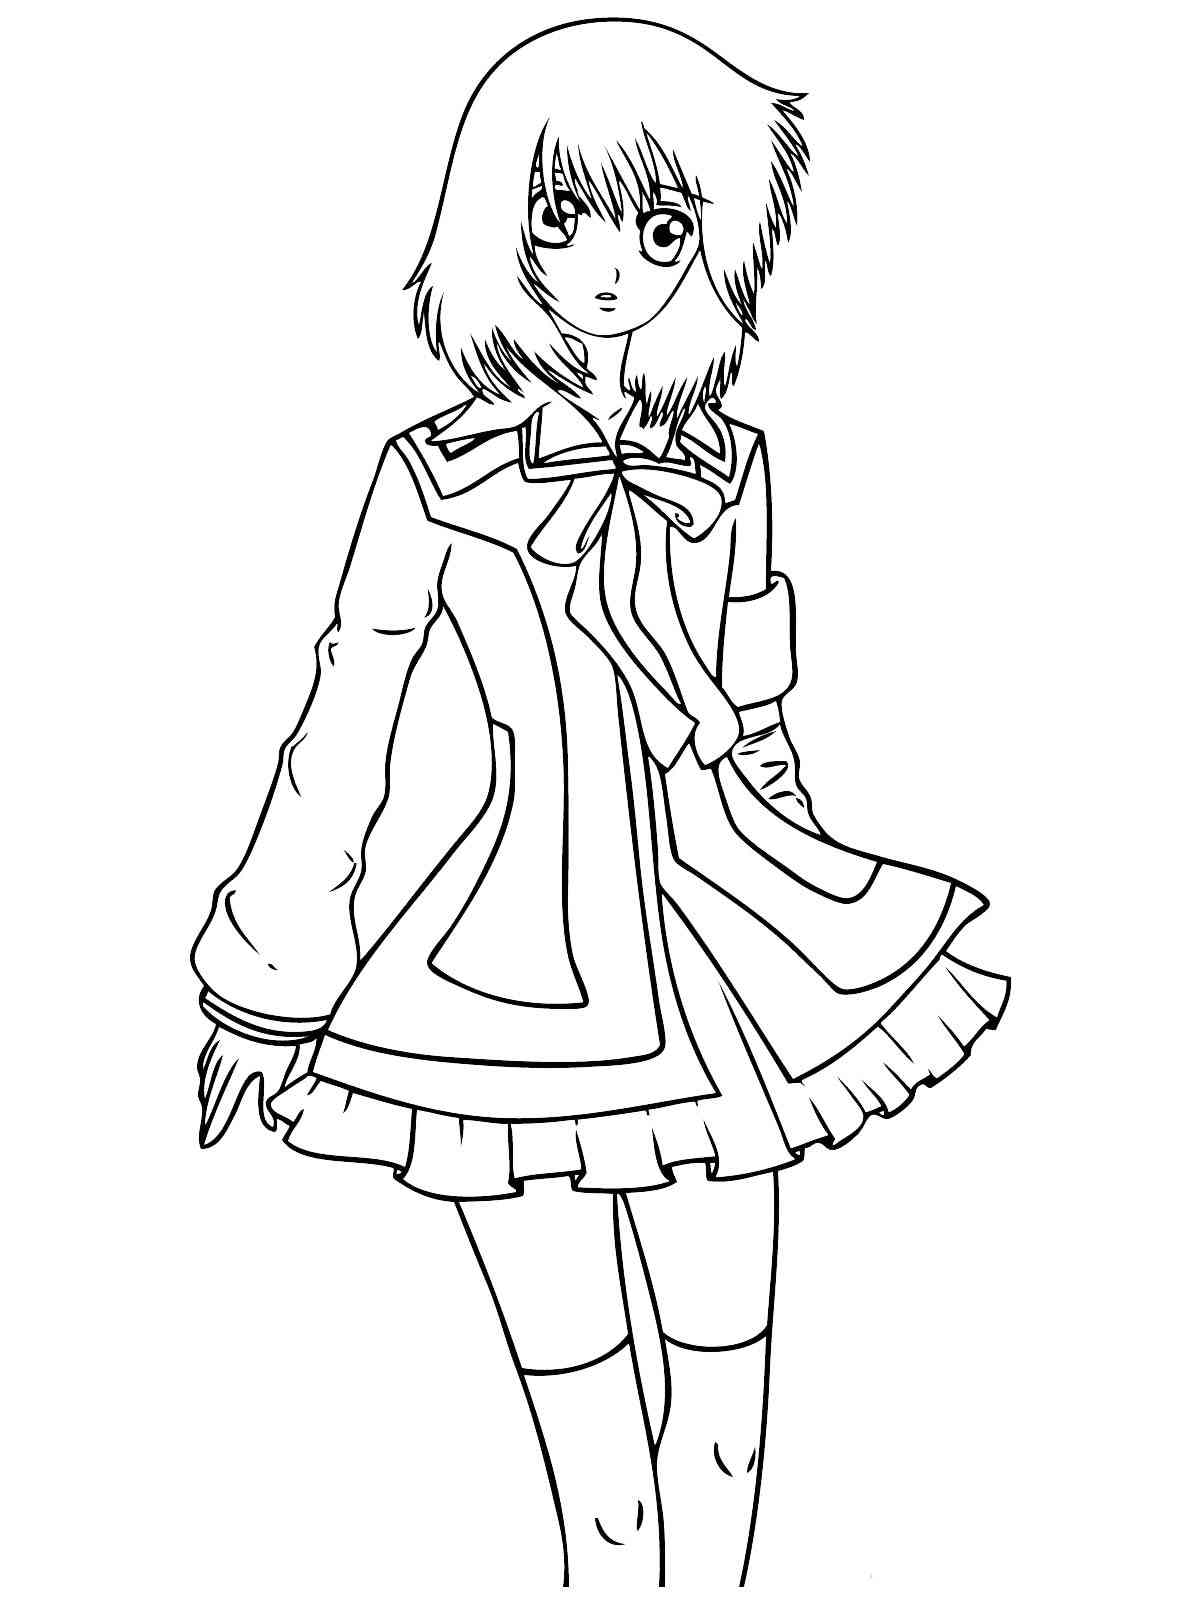 Anime Girl 50 coloring page